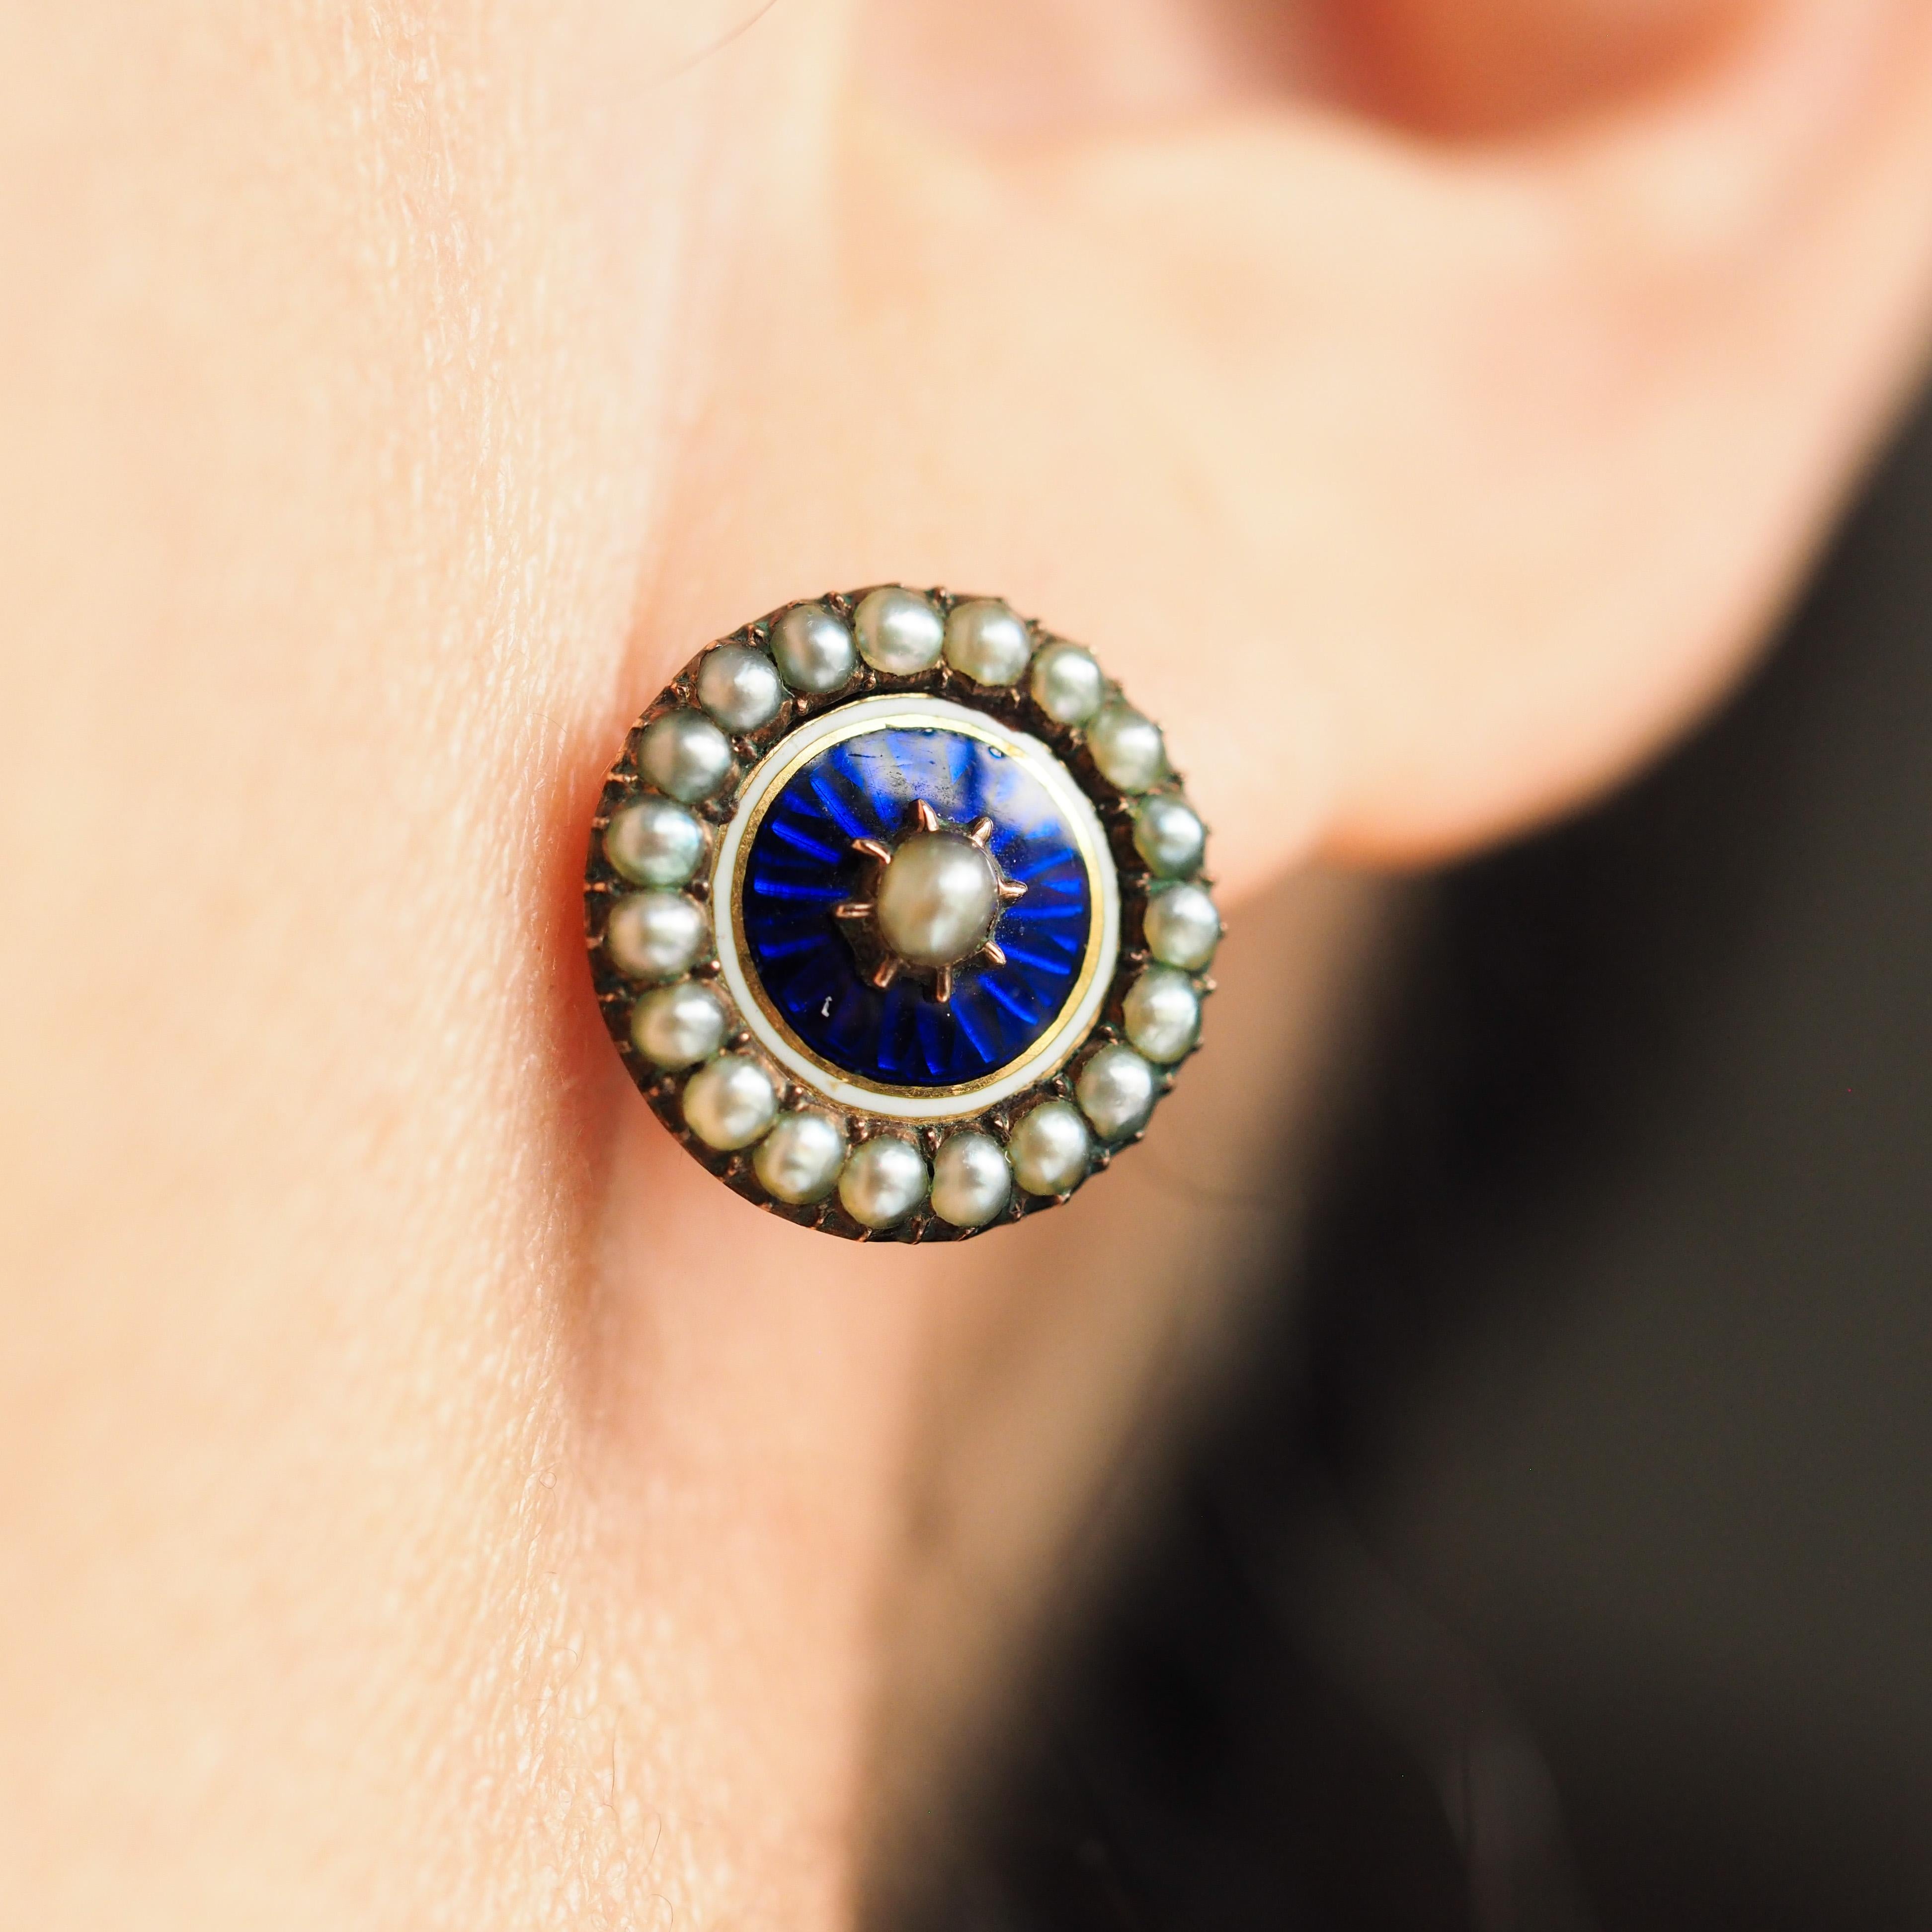 We are delighted to offer this magnificent pair of antique Georgian gold enamel earrings, made c.1880.
  
This unique and beautiful pair is made with the most captivating royal blue enamel on top of a sunburst guilloche design. The surrounding seed